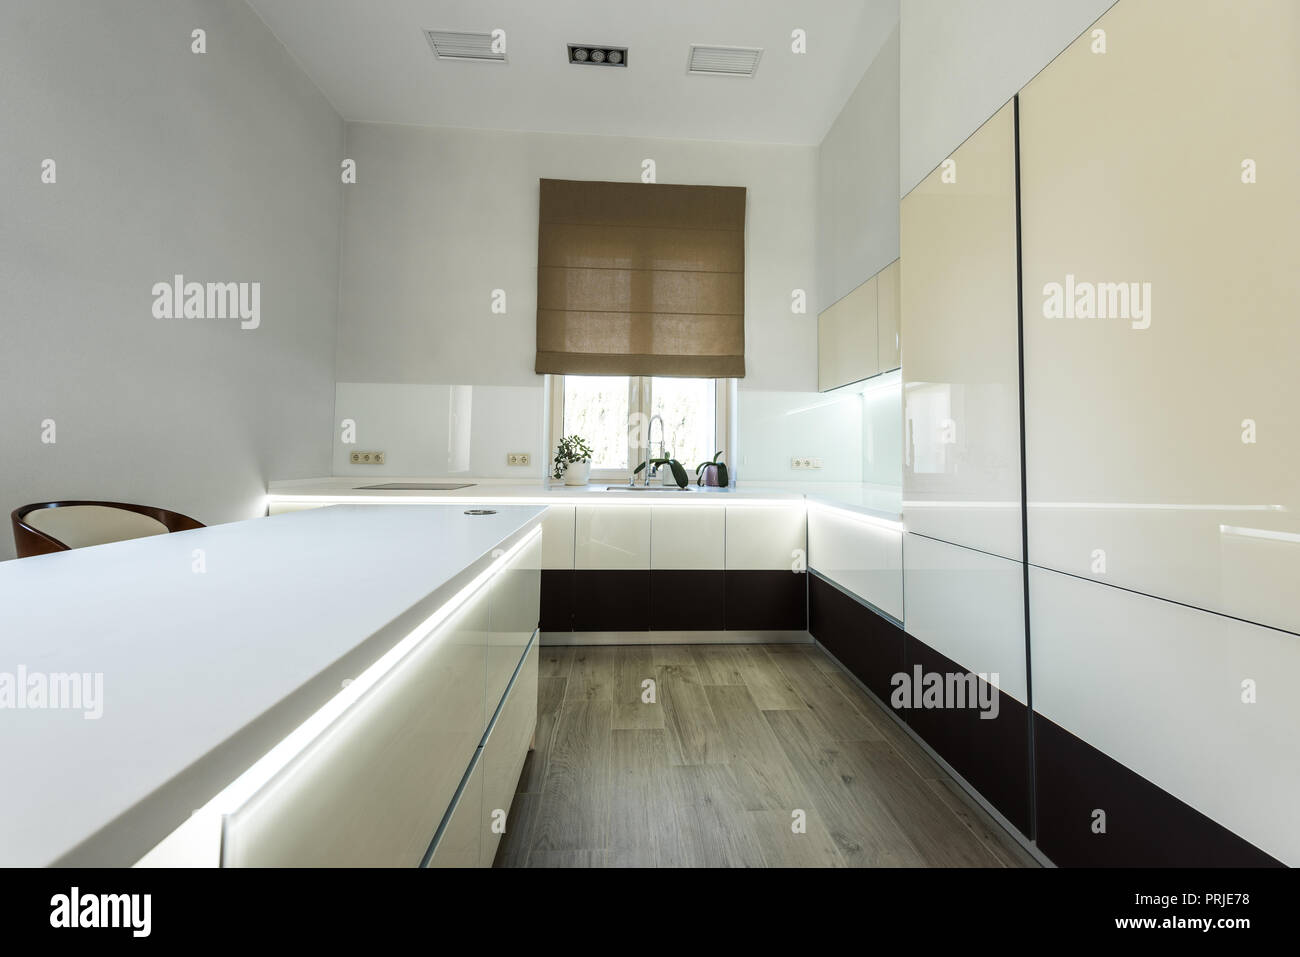 interior view of empty modern kitchen in light colors Stock Photo